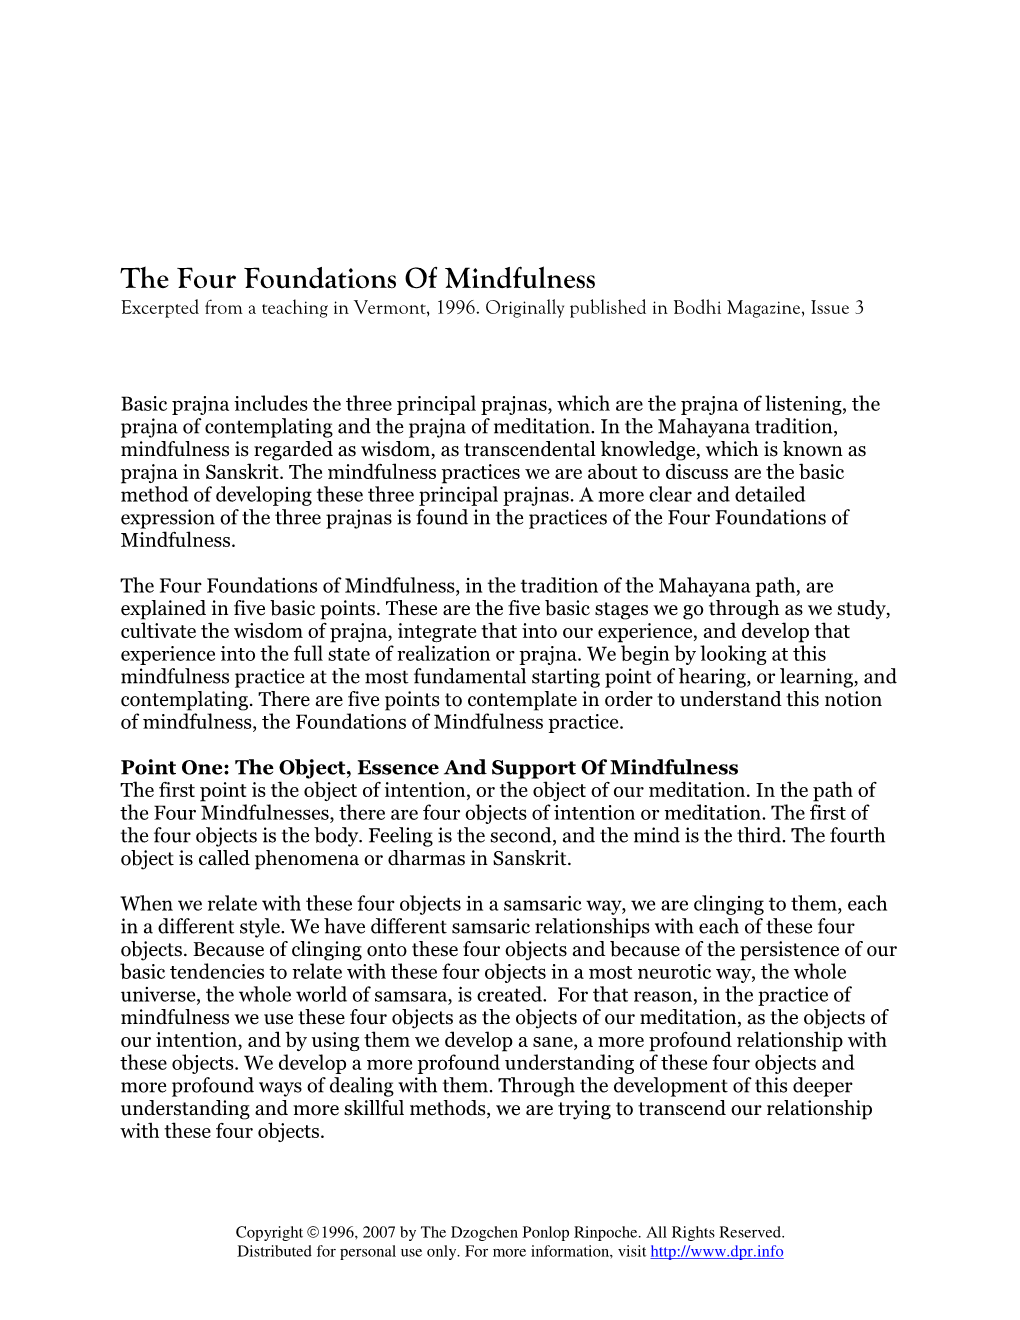 The Four Foundations of Mindfulness Excerpted from a Teaching in Vermont, 1996